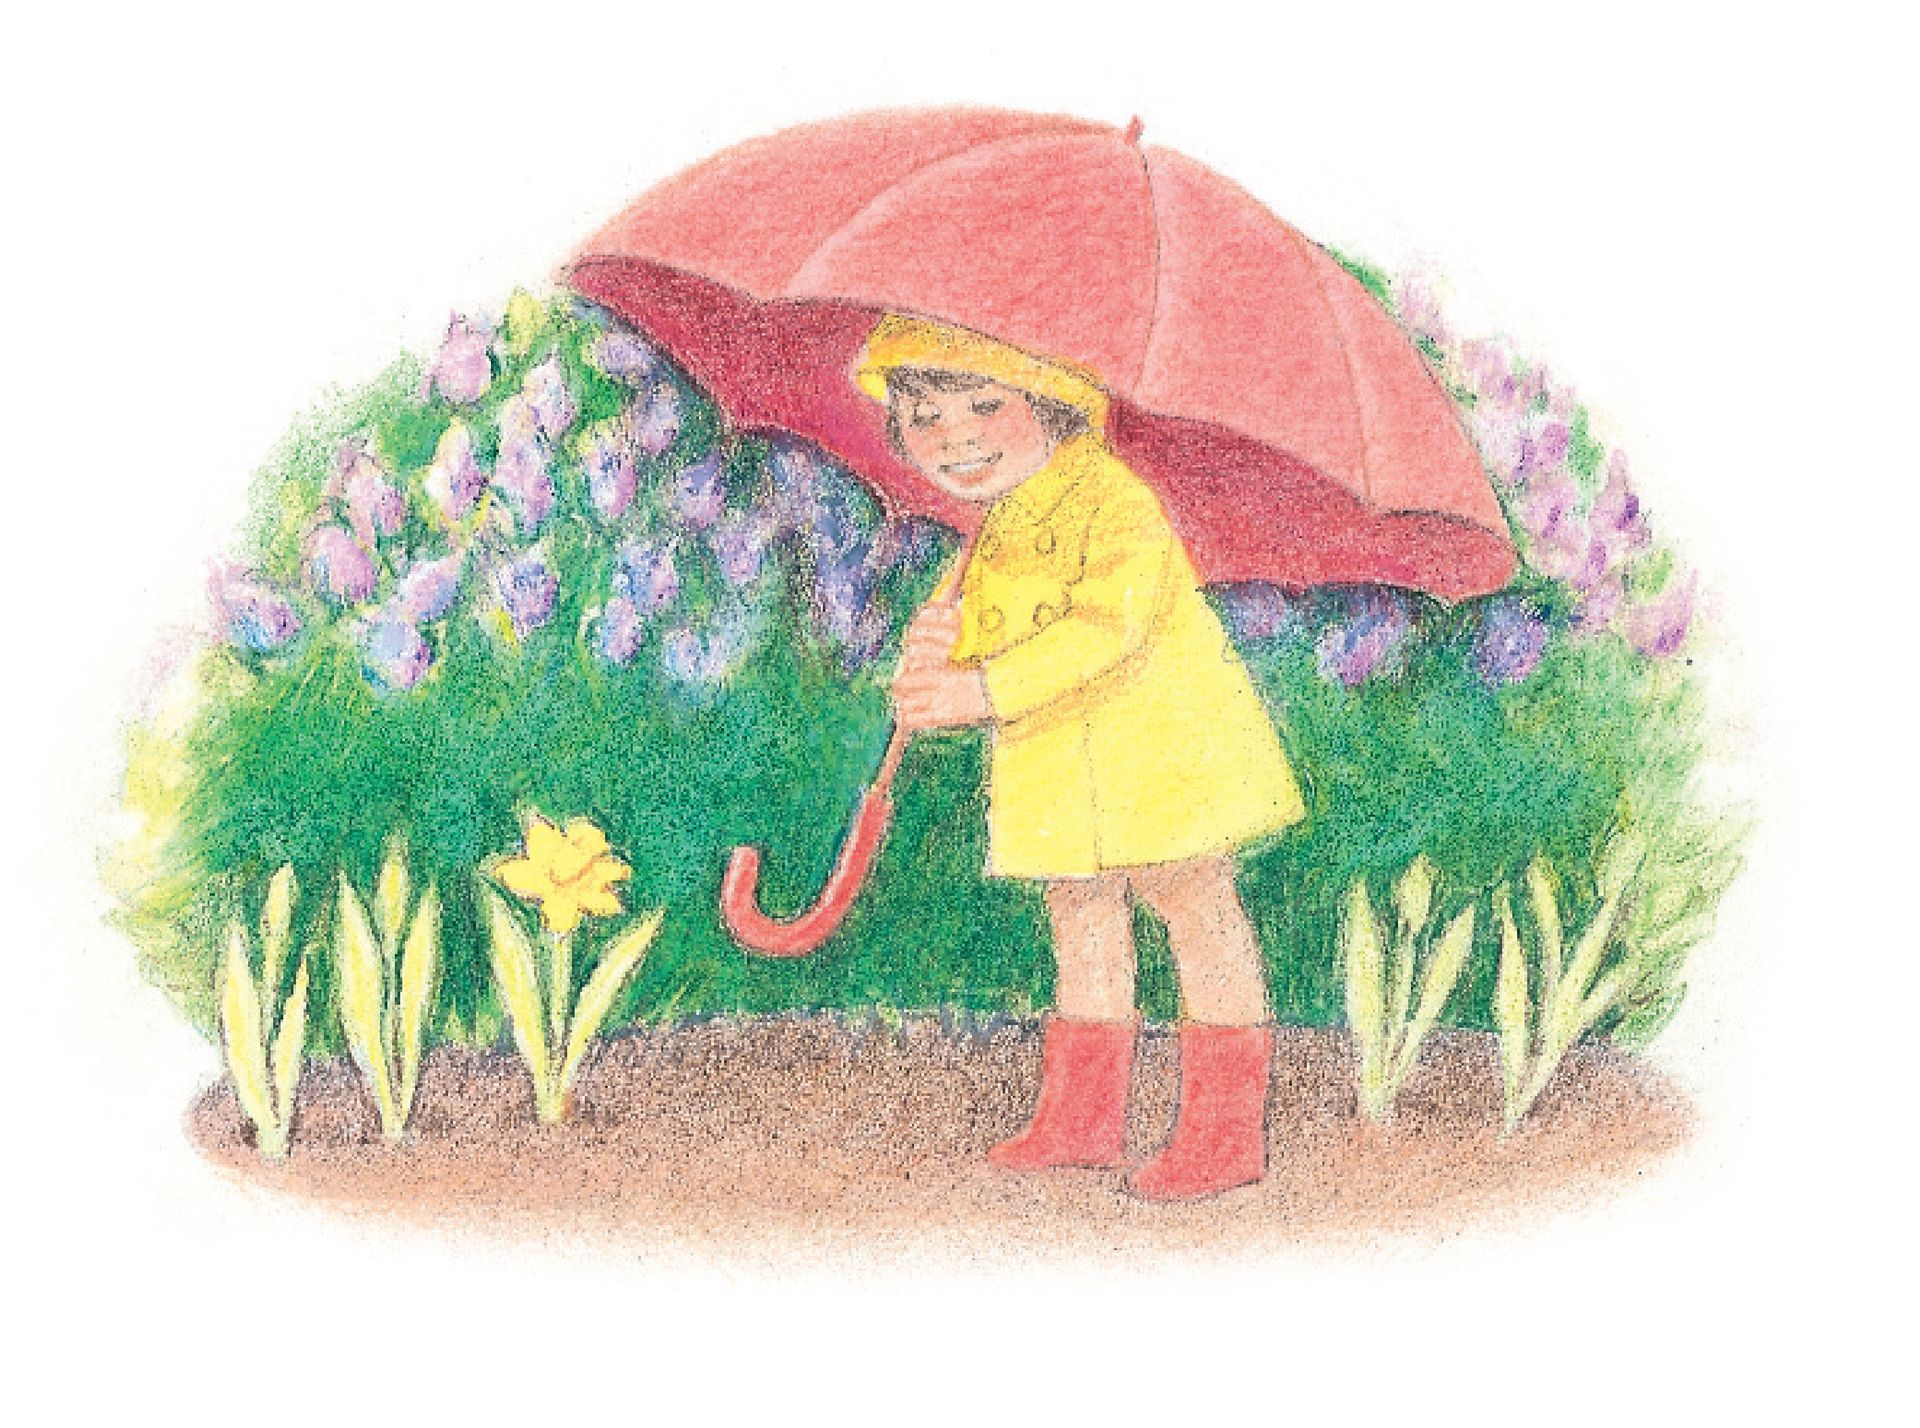 A child in boots and a raincoat walks with an umbrella through a spring garden. From the Children’s Songbook, page 228, “My Heavenly Father Loves Me”; watercolor illustration by Virginia Sargent.